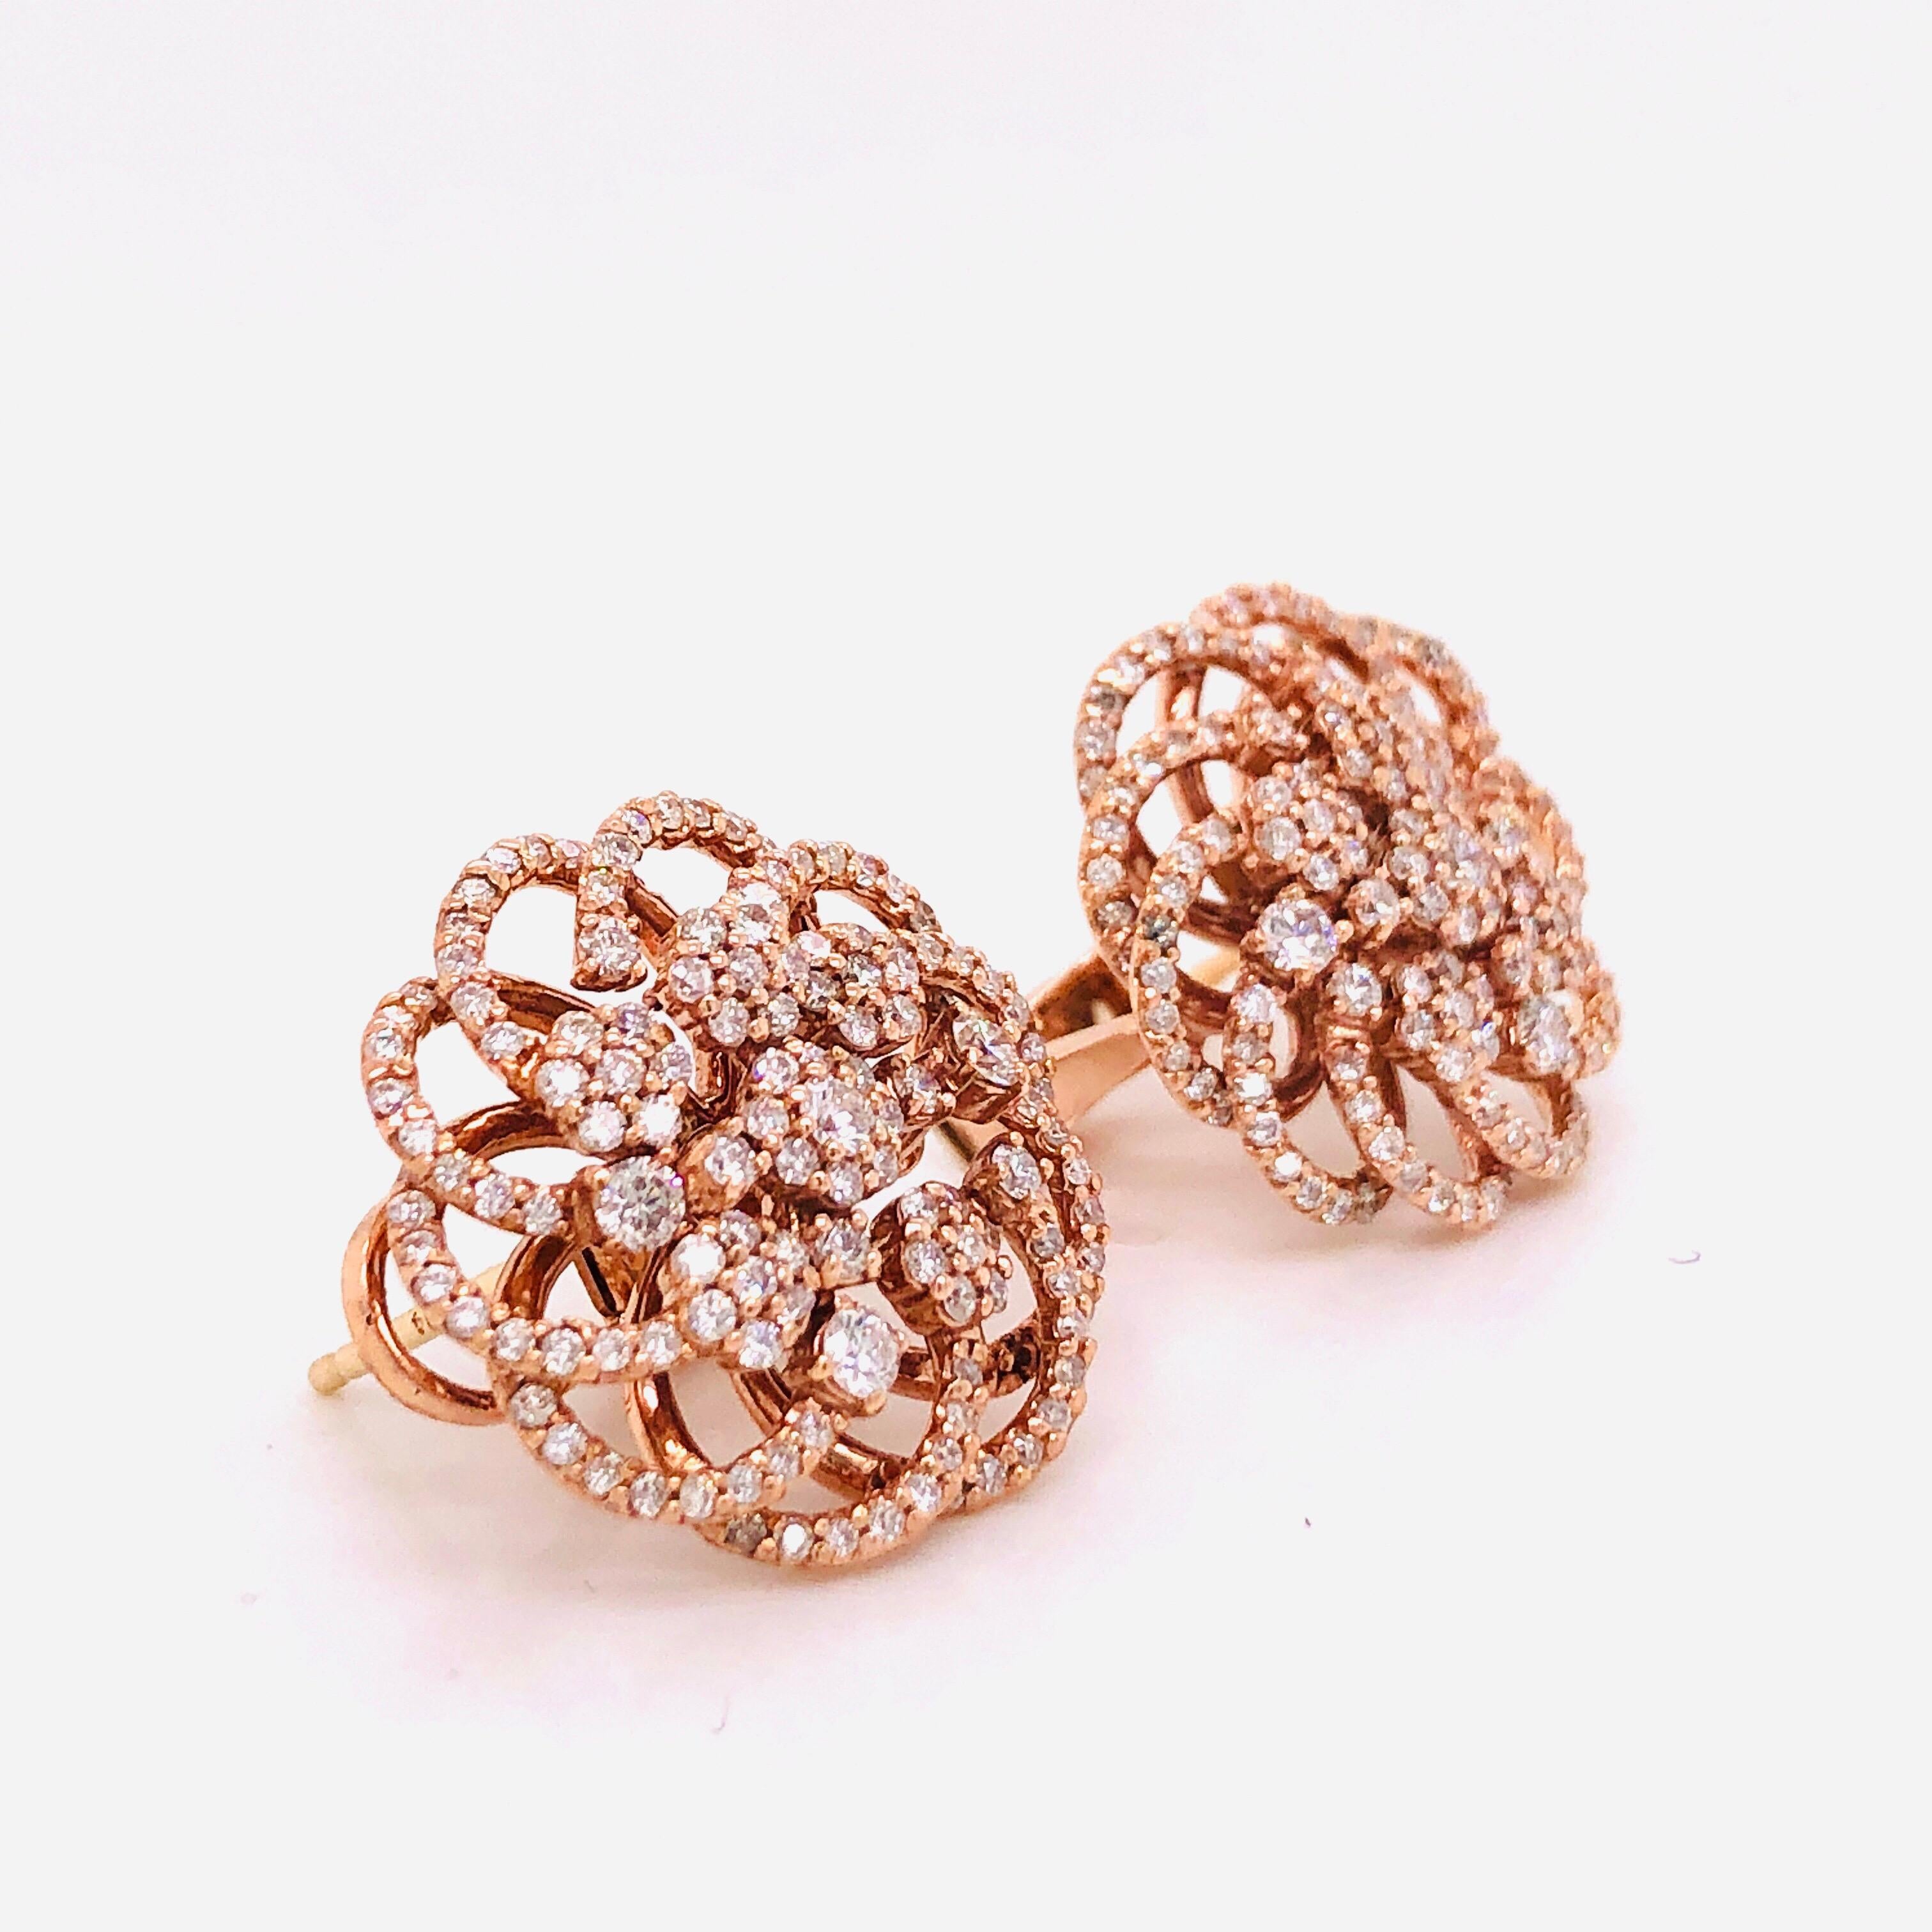 Hand made in the Emilio Jewelry factory, this pair is set in 14k rose gold with 276 round white diamonds totaling 1.89 carats. The earrings measure 19.75mm wide.
Color: F-
Clarity: Vs-Si 